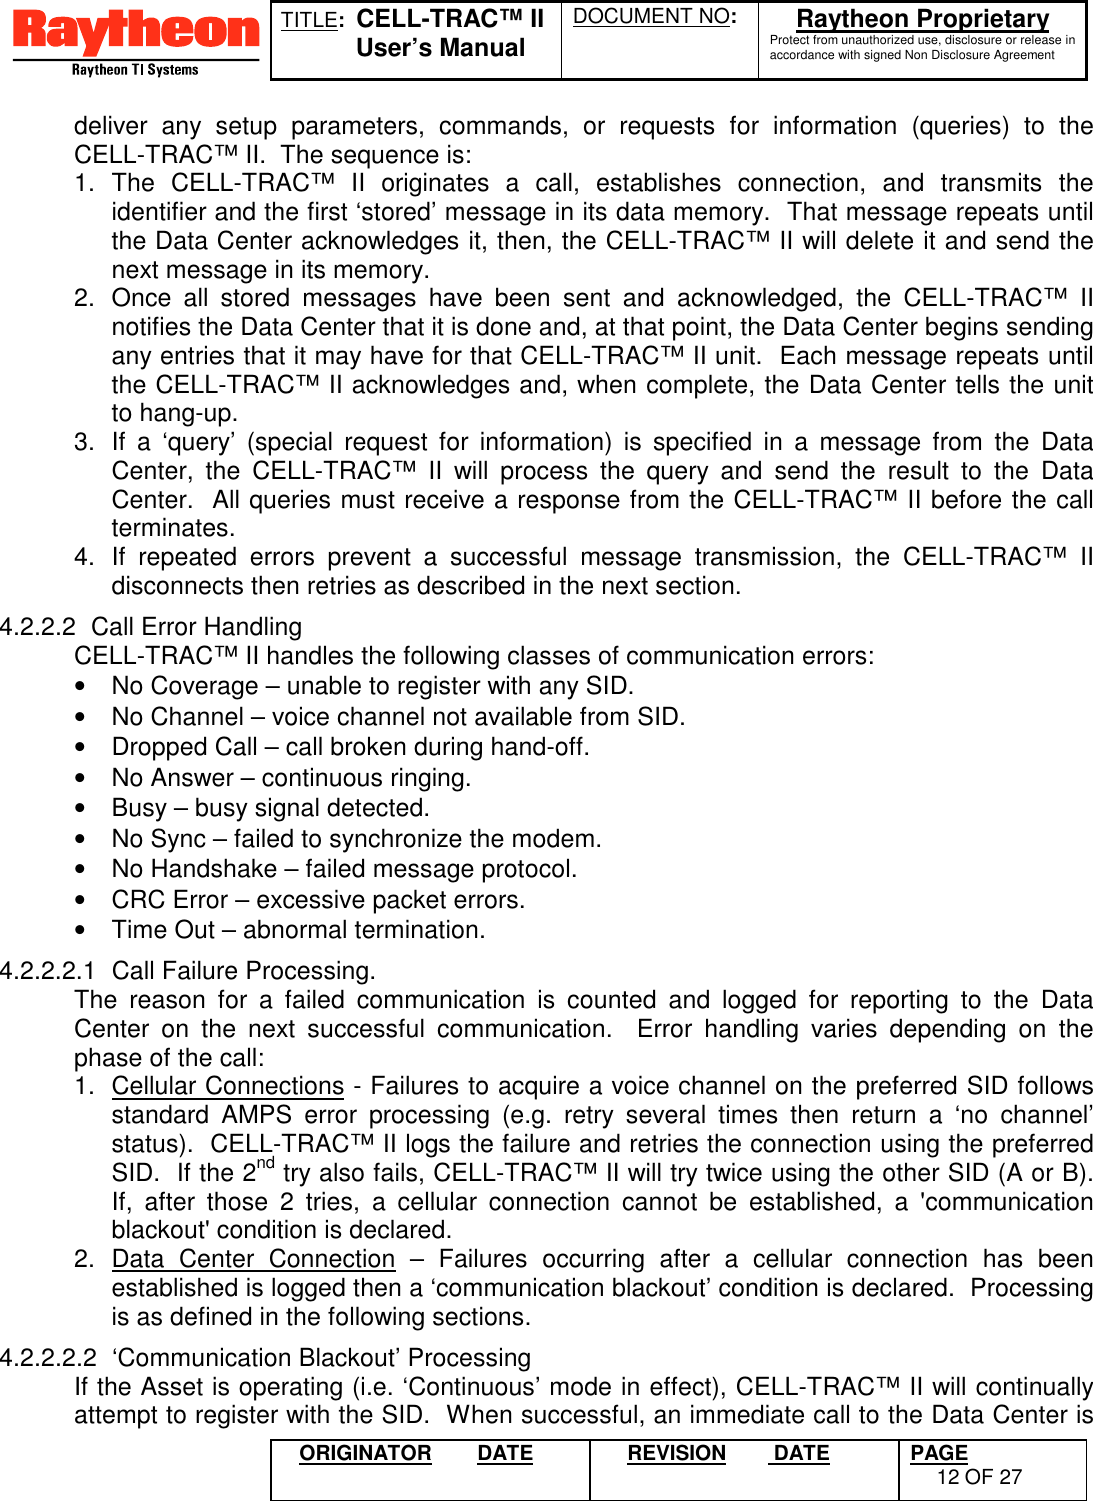 TITLE:  CELL-TRAC™ IIUser’s ManualDOCUMENT NO: Raytheon ProprietaryProtect from unauthorized use, disclosure or release inaccordance with signed Non Disclosure AgreementORIGINATOR DATE REVISION  DATE PAGE12 OF 27deliver any setup parameters, commands, or requests for information (queries) to theCELL-TRAC™ II.  The sequence is:1. The CELL-TRAC™ II originates a call, establishes connection, and transmits theidentifier and the first ‘stored’ message in its data memory.  That message repeats untilthe Data Center acknowledges it, then, the CELL-TRAC™ II will delete it and send thenext message in its memory.2.  Once all stored messages have been sent and acknowledged, the CELL-TRAC™ IInotifies the Data Center that it is done and, at that point, the Data Center begins sendingany entries that it may have for that CELL-TRAC™ II unit.  Each message repeats untilthe CELL-TRAC™ II acknowledges and, when complete, the Data Center tells the unitto hang-up.3.  If a ‘query’ (special request for information) is specified in a message from the DataCenter, the CELL-TRAC™ II will process the query and send the result to the DataCenter.  All queries must receive a response from the CELL-TRAC™ II before the callterminates.4.  If repeated errors prevent a successful message transmission, the CELL-TRAC™ IIdisconnects then retries as described in the next section.4.2.2.2  Call Error HandlingCELL-TRAC™ II handles the following classes of communication errors:•  No Coverage – unable to register with any SID.•  No Channel – voice channel not available from SID.•  Dropped Call – call broken during hand-off.•  No Answer – continuous ringing.•  Busy – busy signal detected.•  No Sync – failed to synchronize the modem.•  No Handshake – failed message protocol.•  CRC Error – excessive packet errors.•  Time Out – abnormal termination.4.2.2.2.1  Call Failure Processing.The reason for a failed communication is counted and logged for reporting to the DataCenter on the next successful communication.  Error handling varies depending on thephase of the call:1.  Cellular Connections - Failures to acquire a voice channel on the preferred SID followsstandard AMPS error processing (e.g. retry several times then return a ‘no channel’status).  CELL-TRAC™ II logs the failure and retries the connection using the preferredSID.  If the 2nd try also fails, CELL-TRAC™ II will try twice using the other SID (A or B).If, after those 2 tries, a cellular connection cannot be established, a &apos;communicationblackout&apos; condition is declared.2. Data Center Connection – Failures occurring after a cellular connection has beenestablished is logged then a ‘communication blackout’ condition is declared.  Processingis as defined in the following sections.4.2.2.2.2  ‘Communication Blackout’ ProcessingIf the Asset is operating (i.e. ‘Continuous’ mode in effect), CELL-TRAC™ II will continuallyattempt to register with the SID.  When successful, an immediate call to the Data Center is